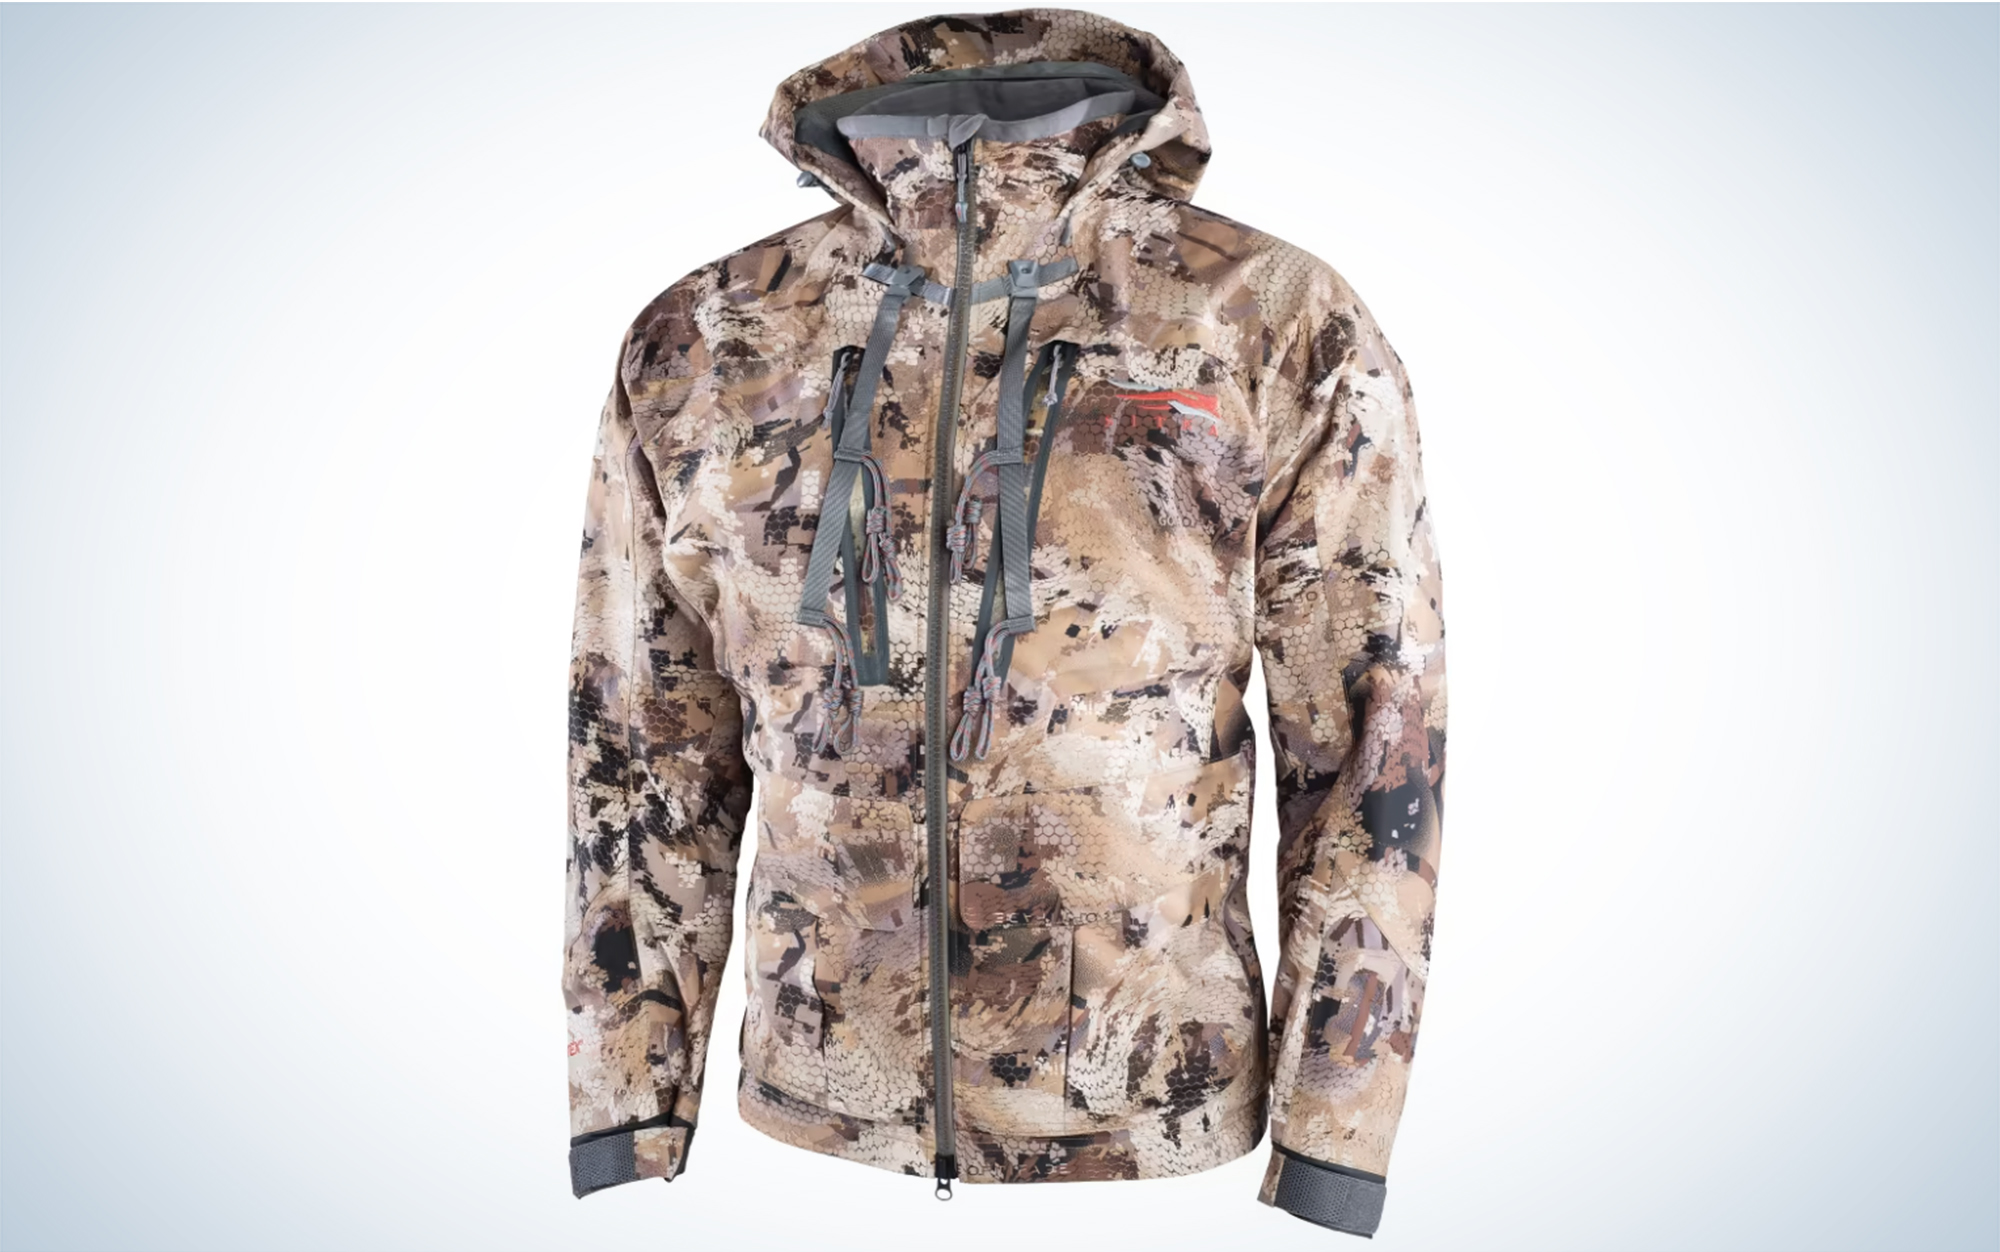 The Sitka's Hudson Jacket is a hardcore shell.